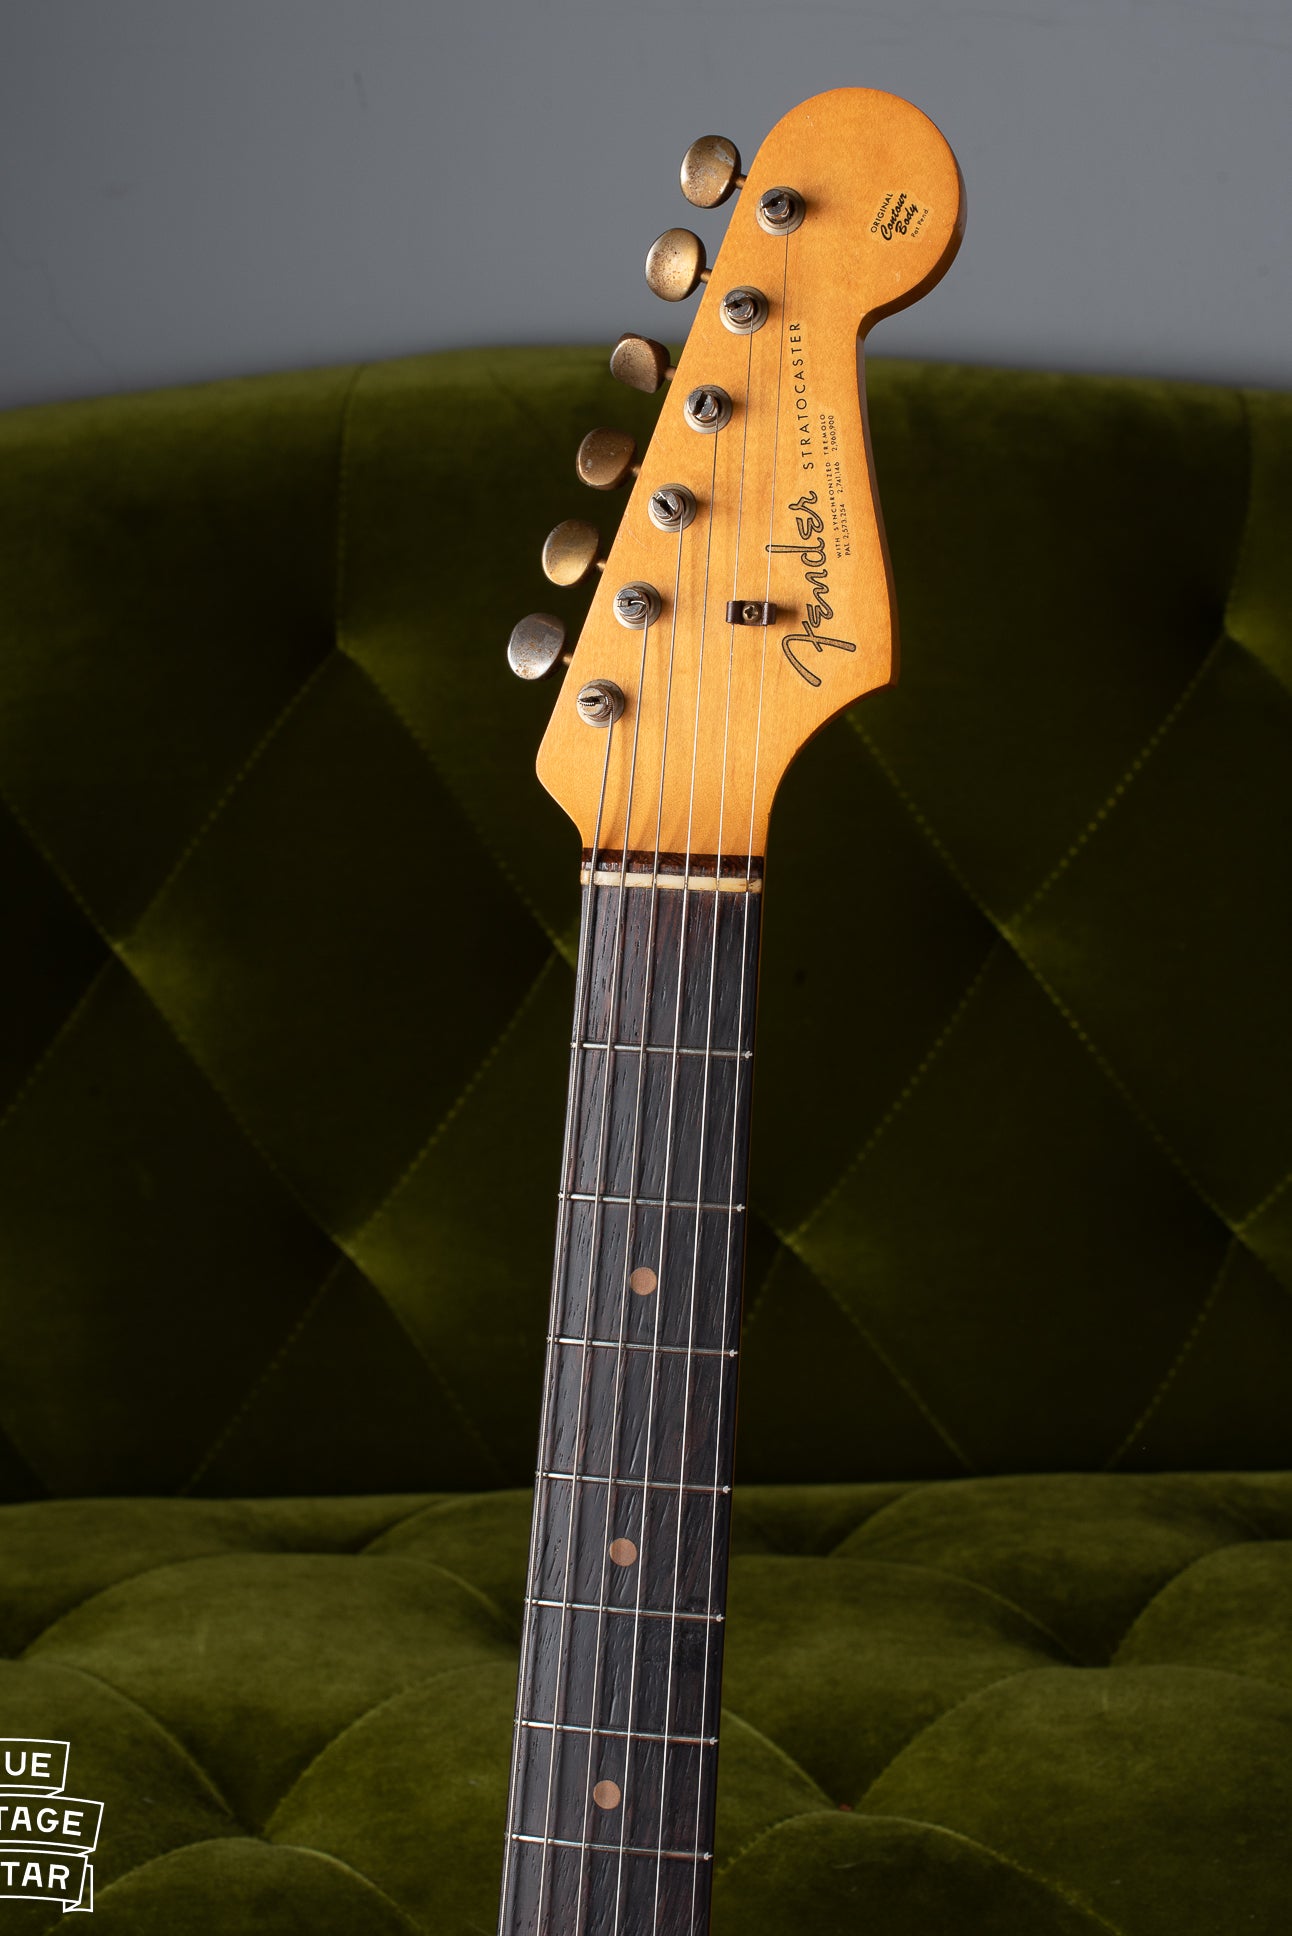 Fender Stratocaster 1963 Rosewood neck with clay dots